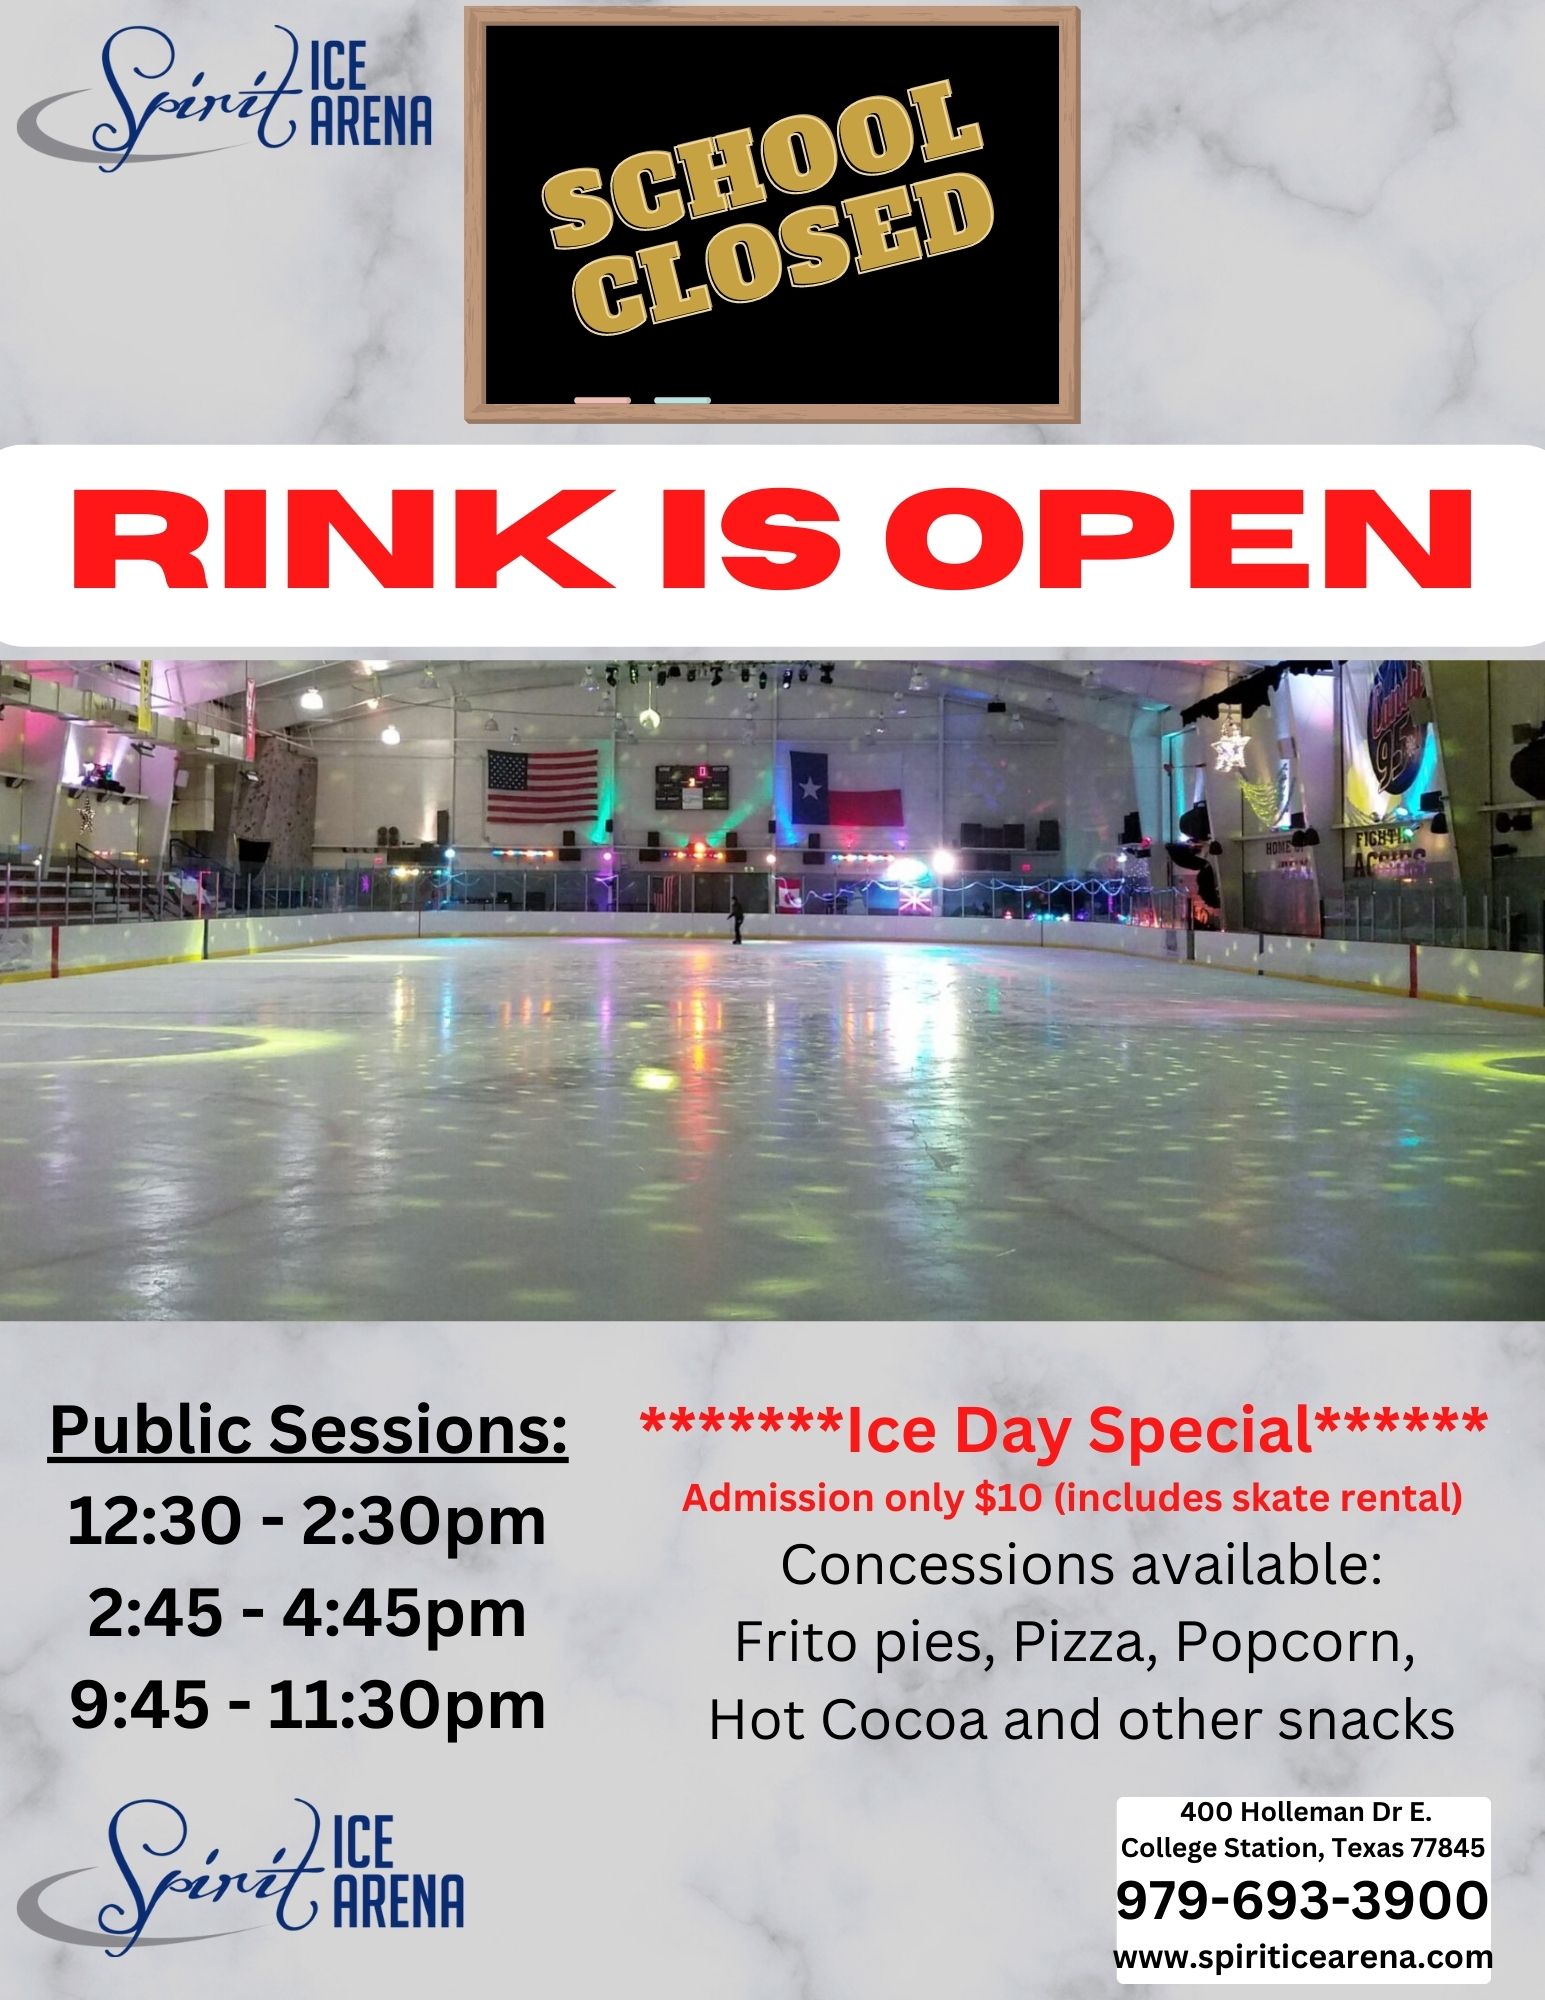 Rink is open on February 1st Spirit Ice Arena